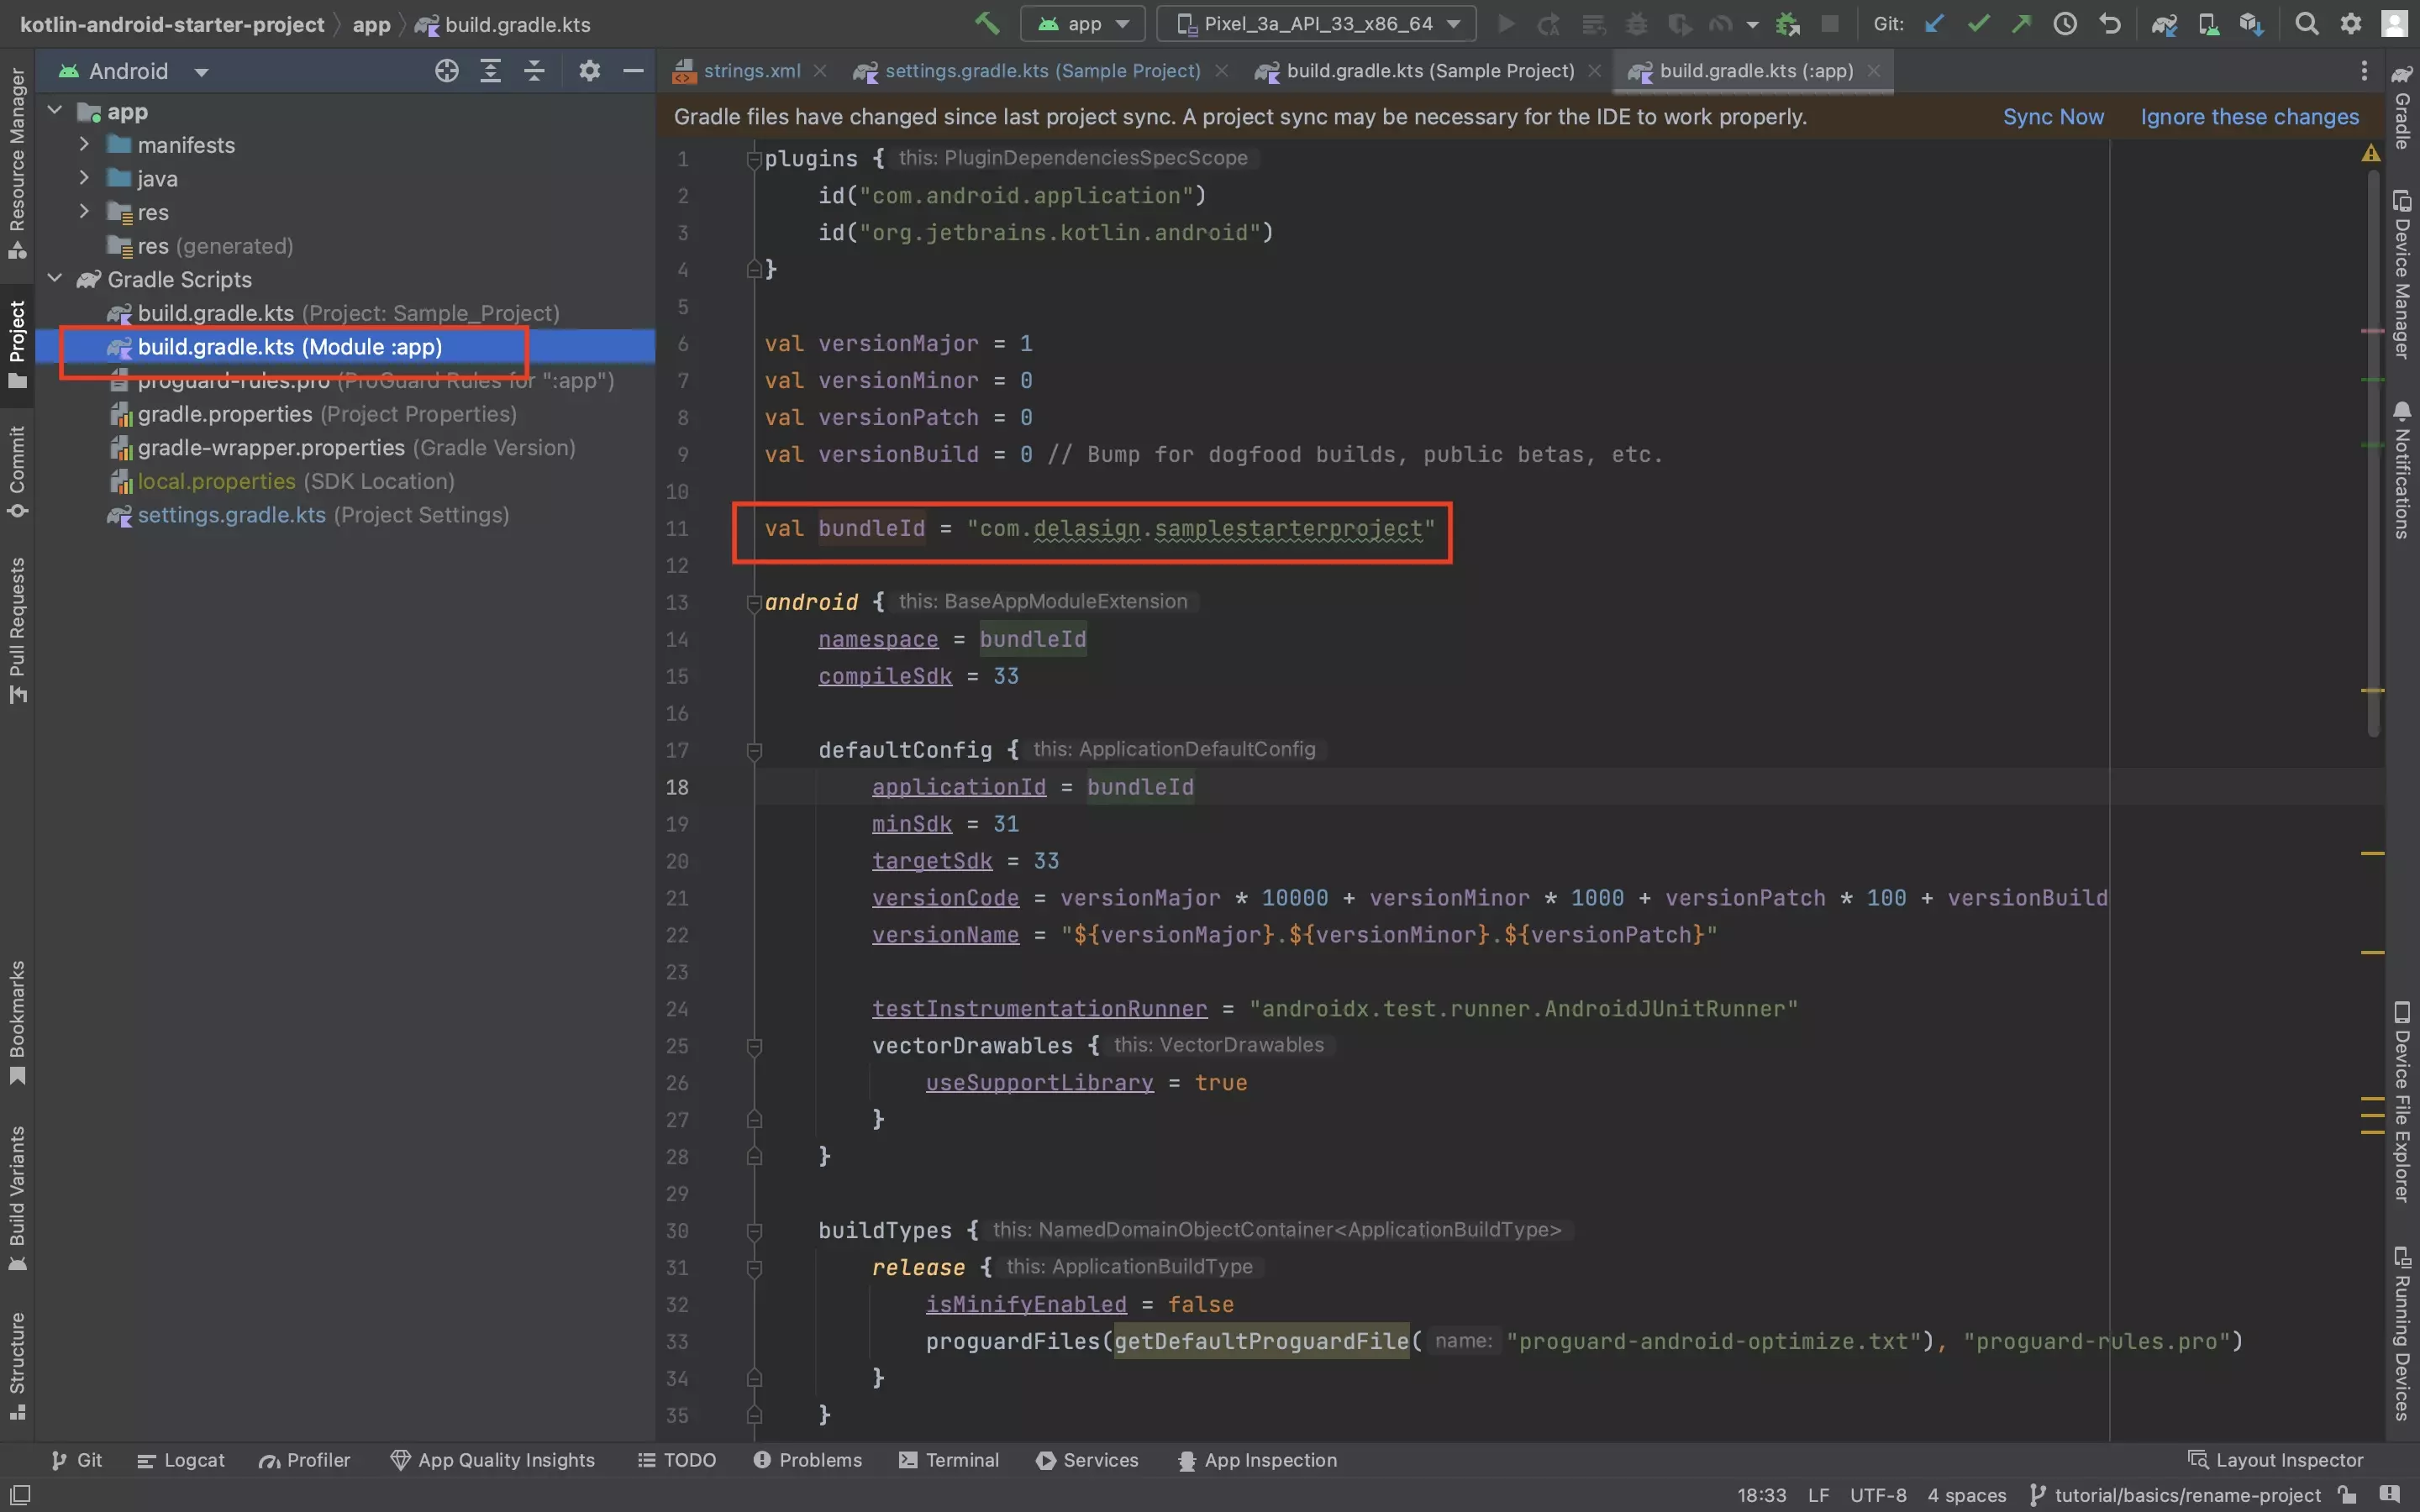 A screenshot of Android Studio showing you how to rename the App Id and Name Space. We have sampled this by creating a "bundleId" value, which is found within the build.gradle.kts file. This has been done to keep things consistent as these are often the same.